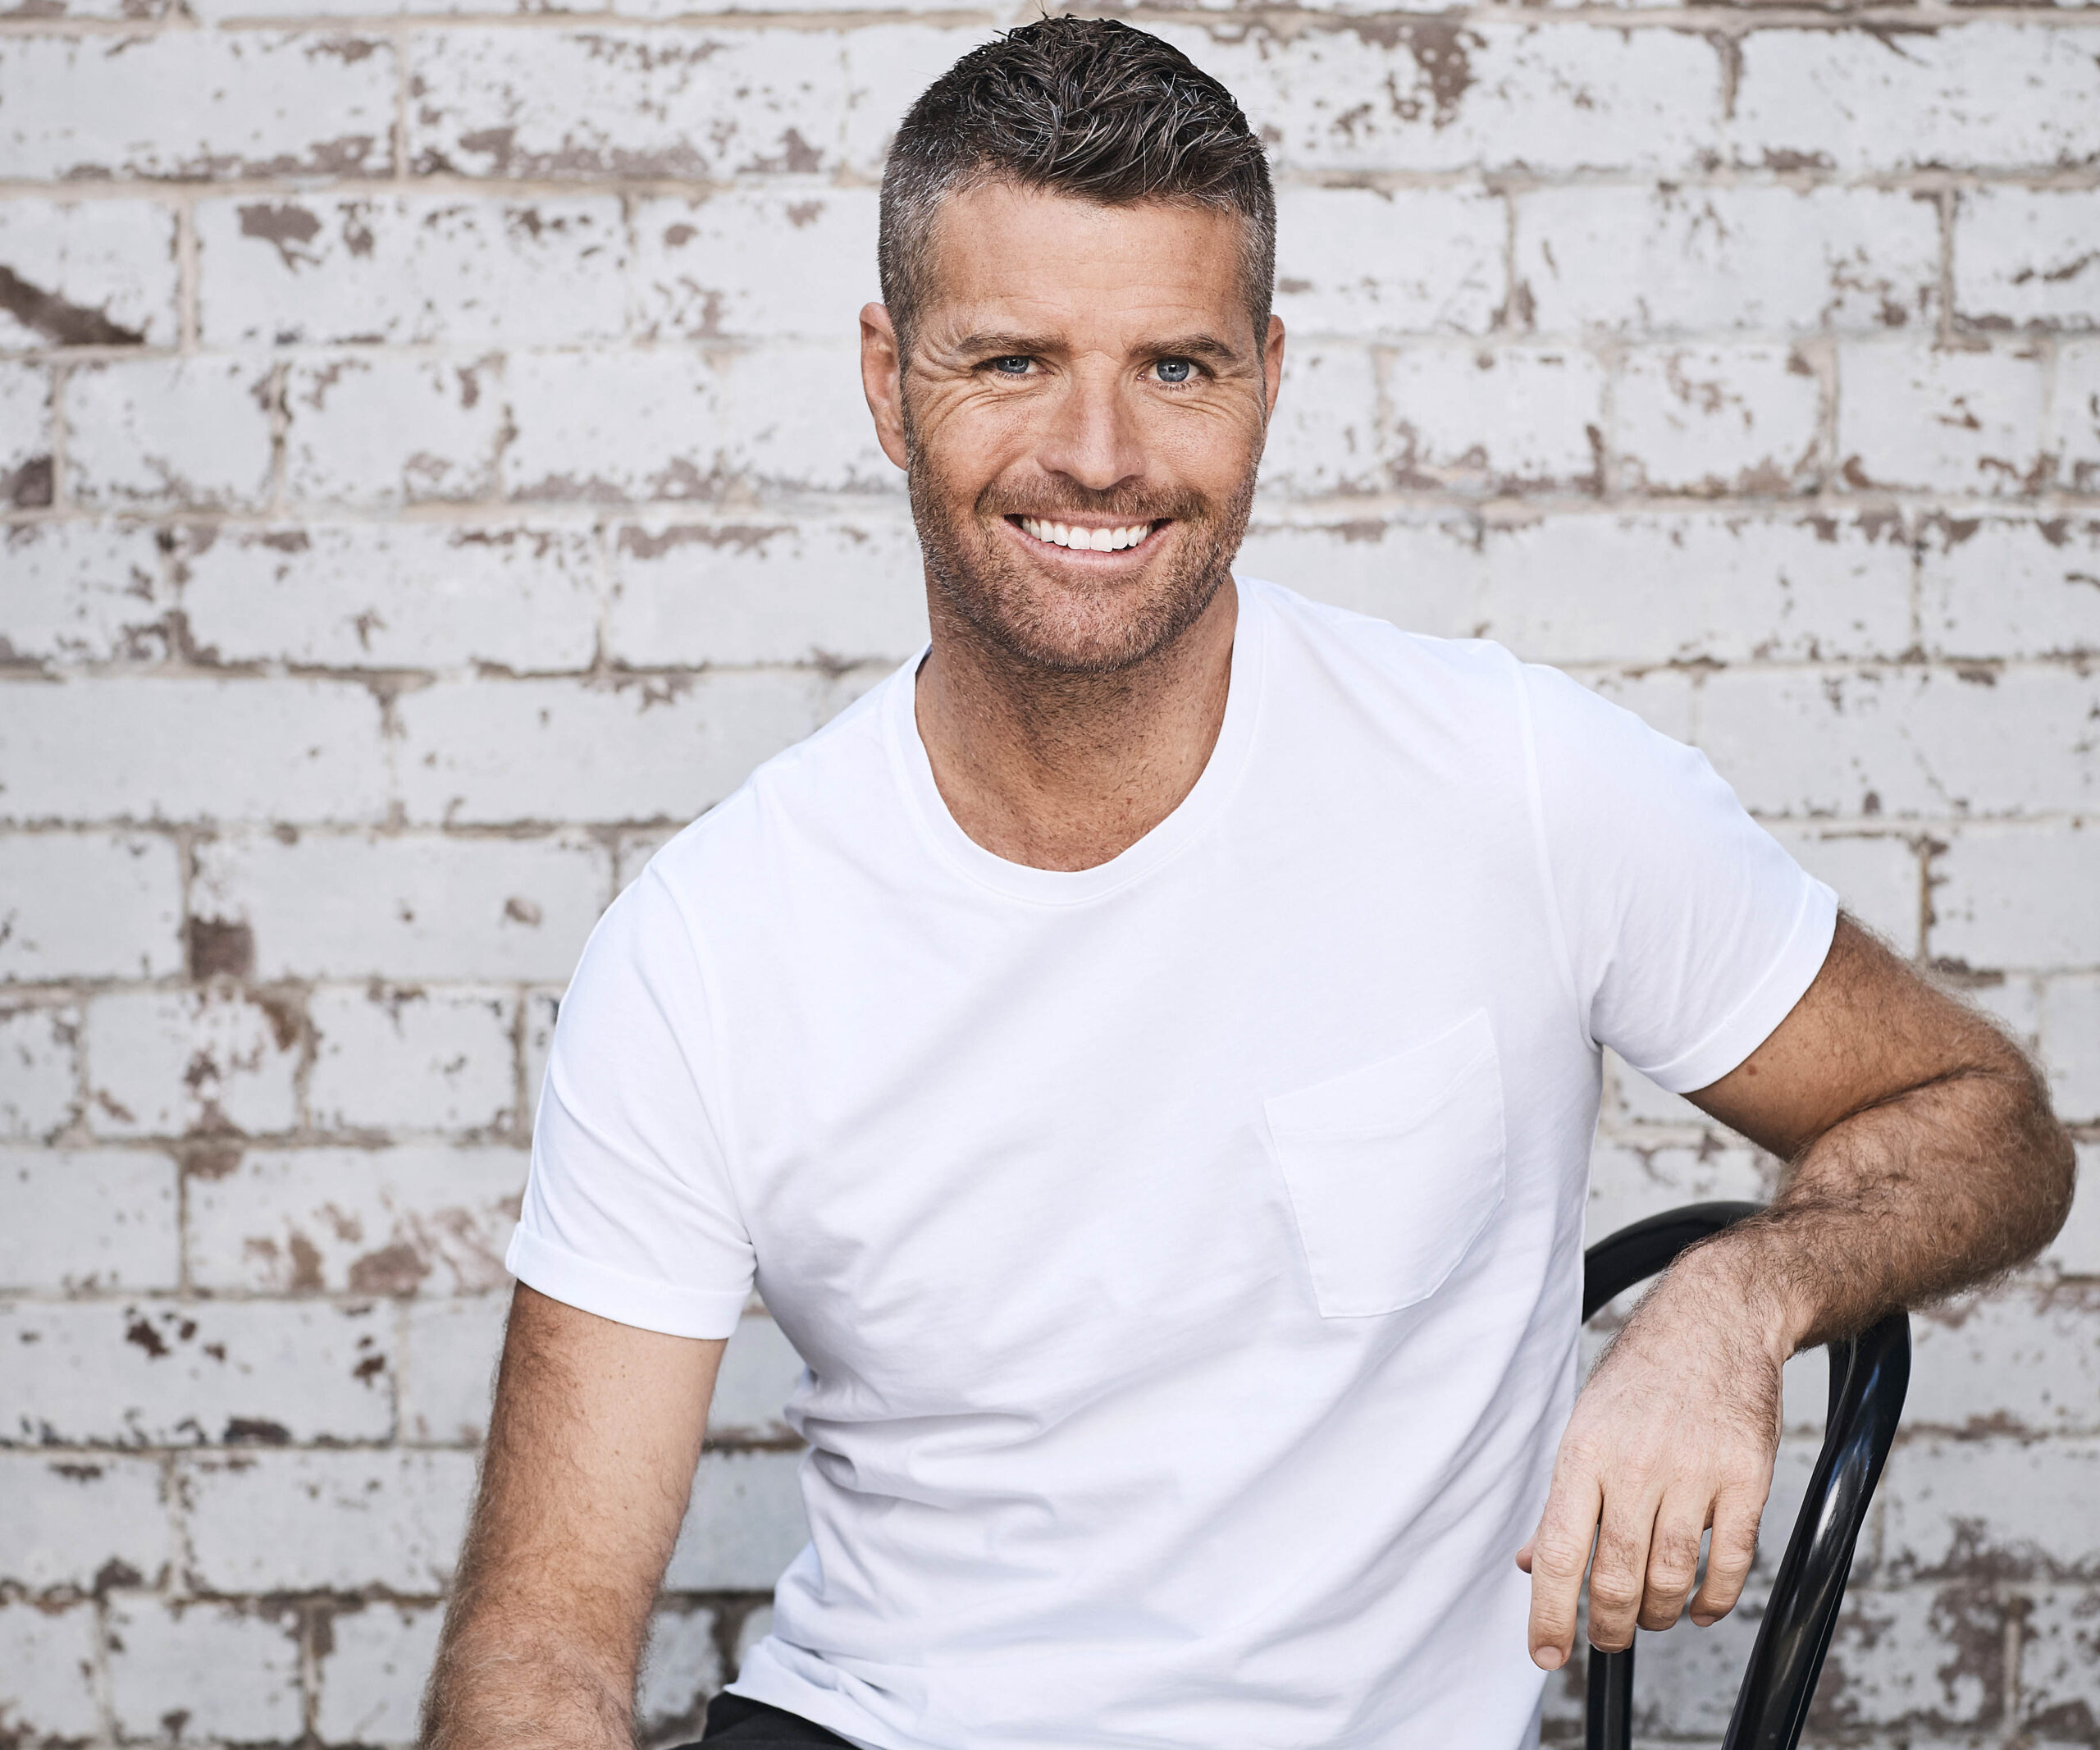 Therapy for babies? Pete Evans says his daughters have been in alternative sessions since 12 months